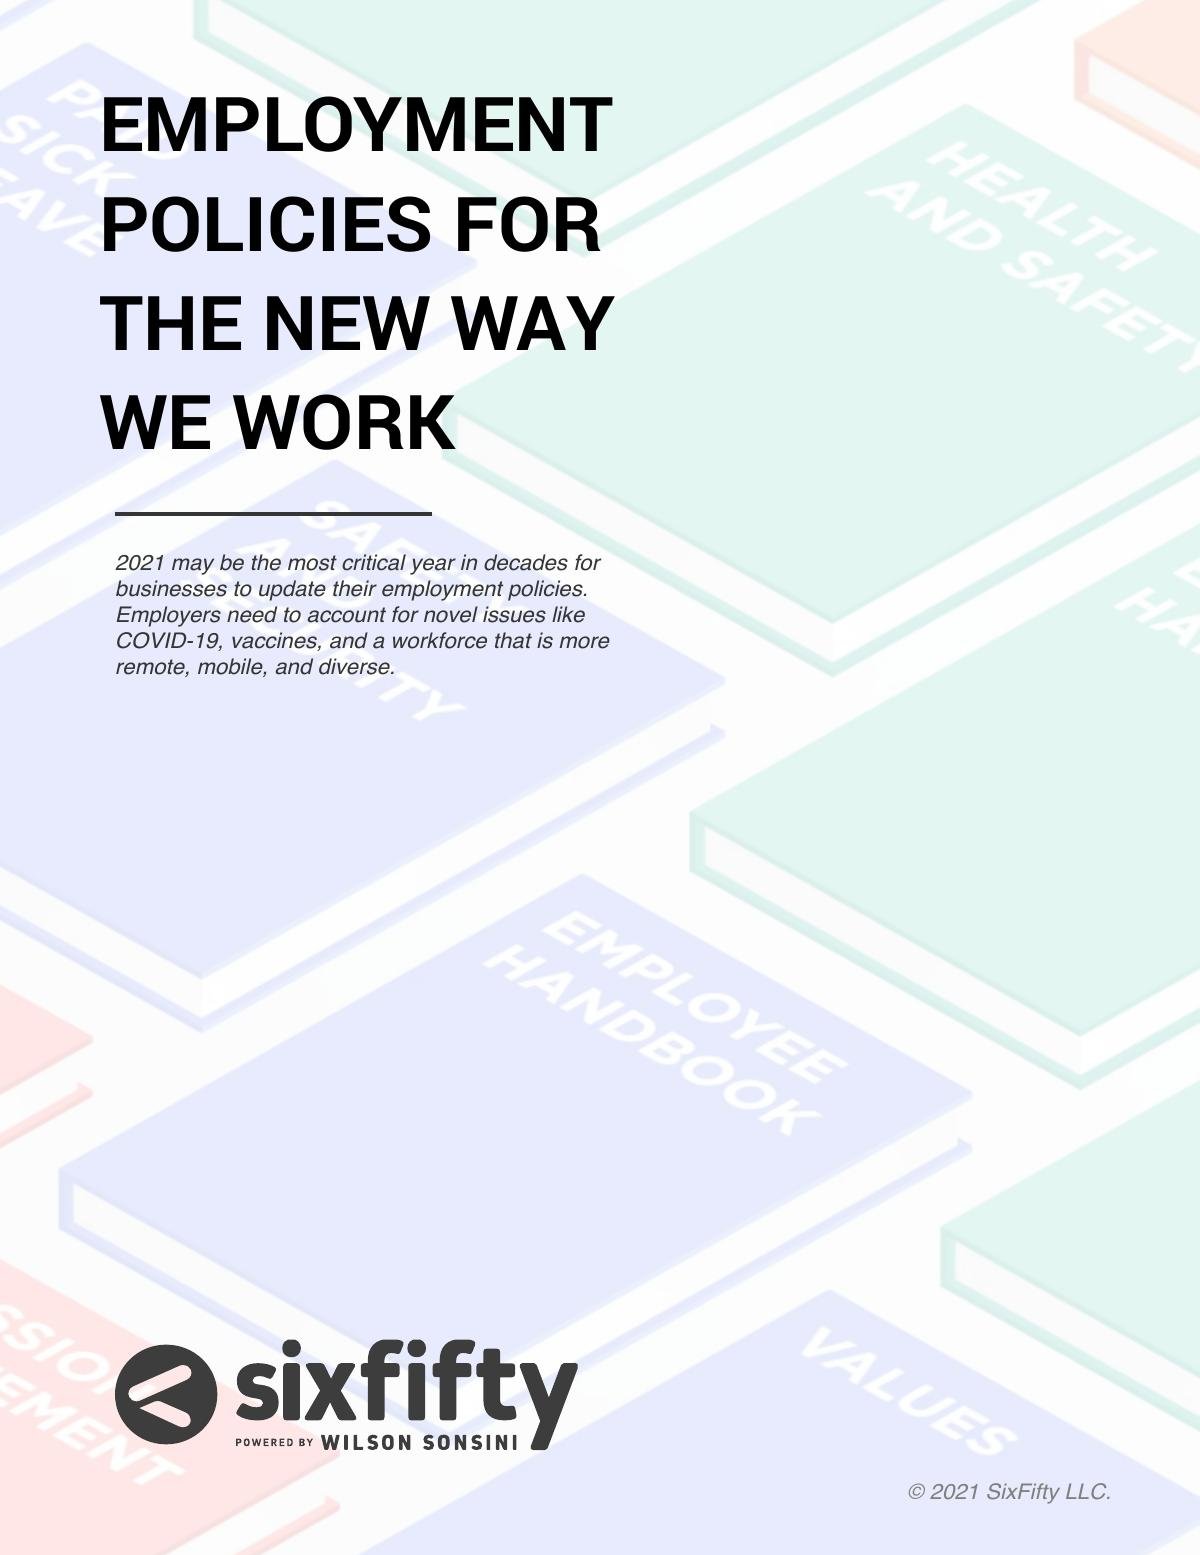 Employee Handbook and Employment Policies for the new way we work